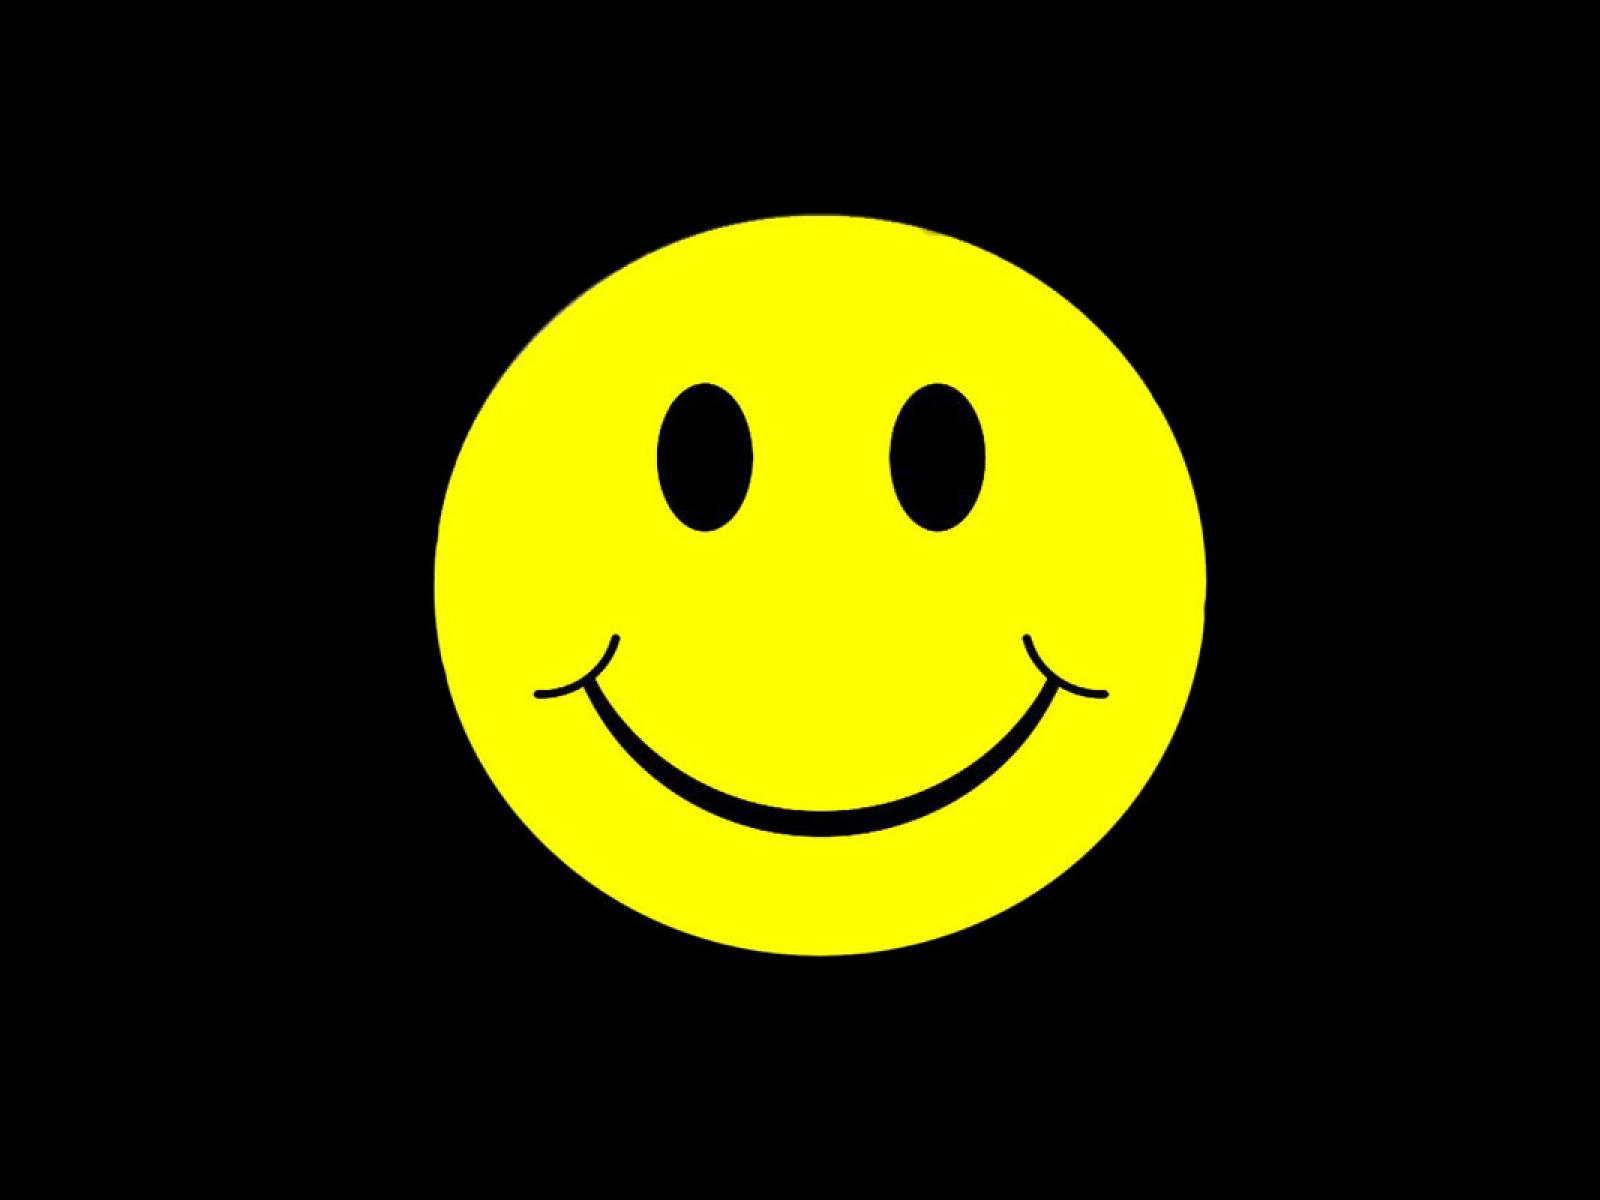 happy smiley face faces black background acid house Normal 43 1600x1200